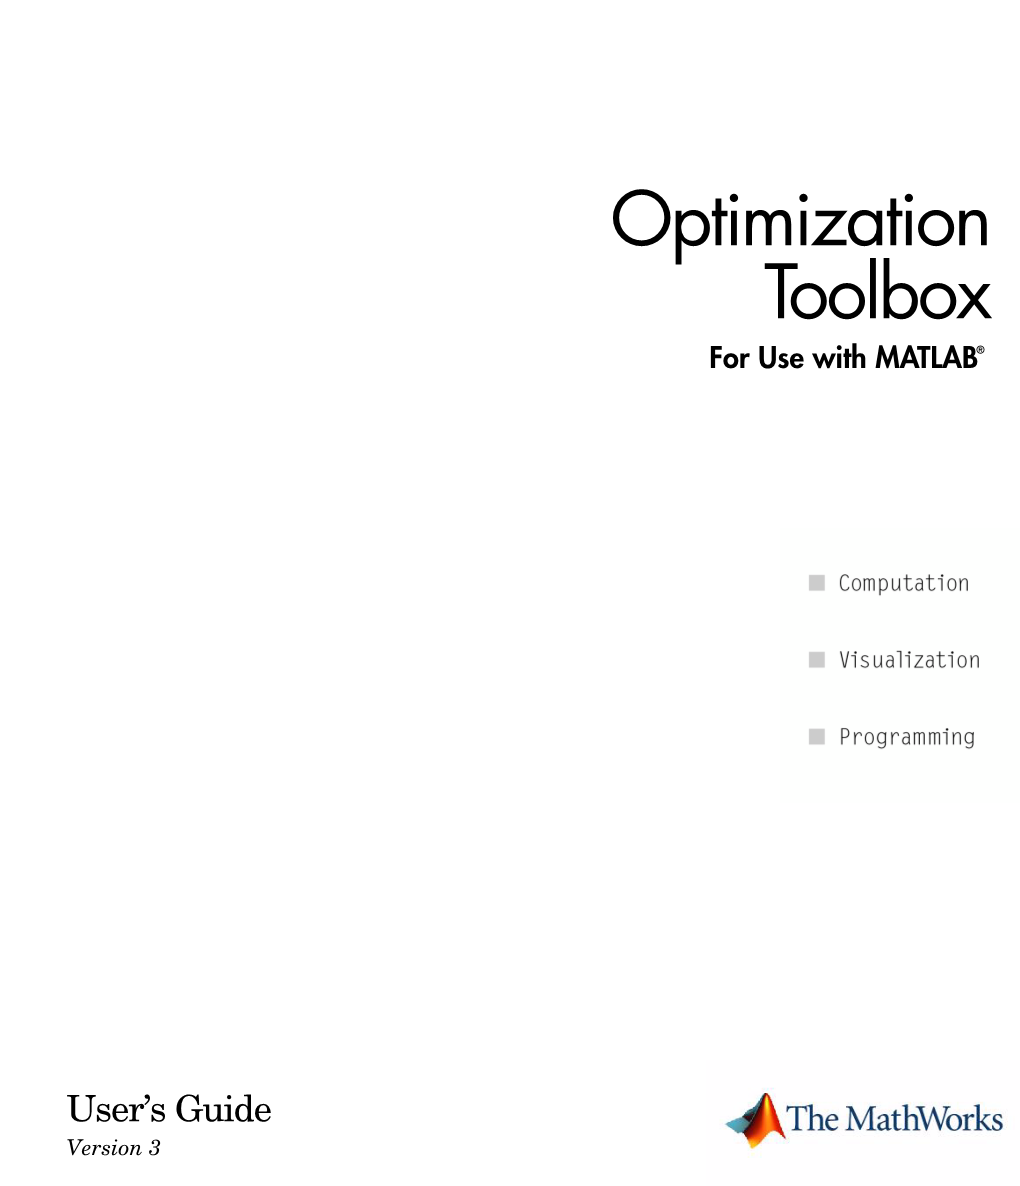 Optimization Toolbox for Use with MATLAB®